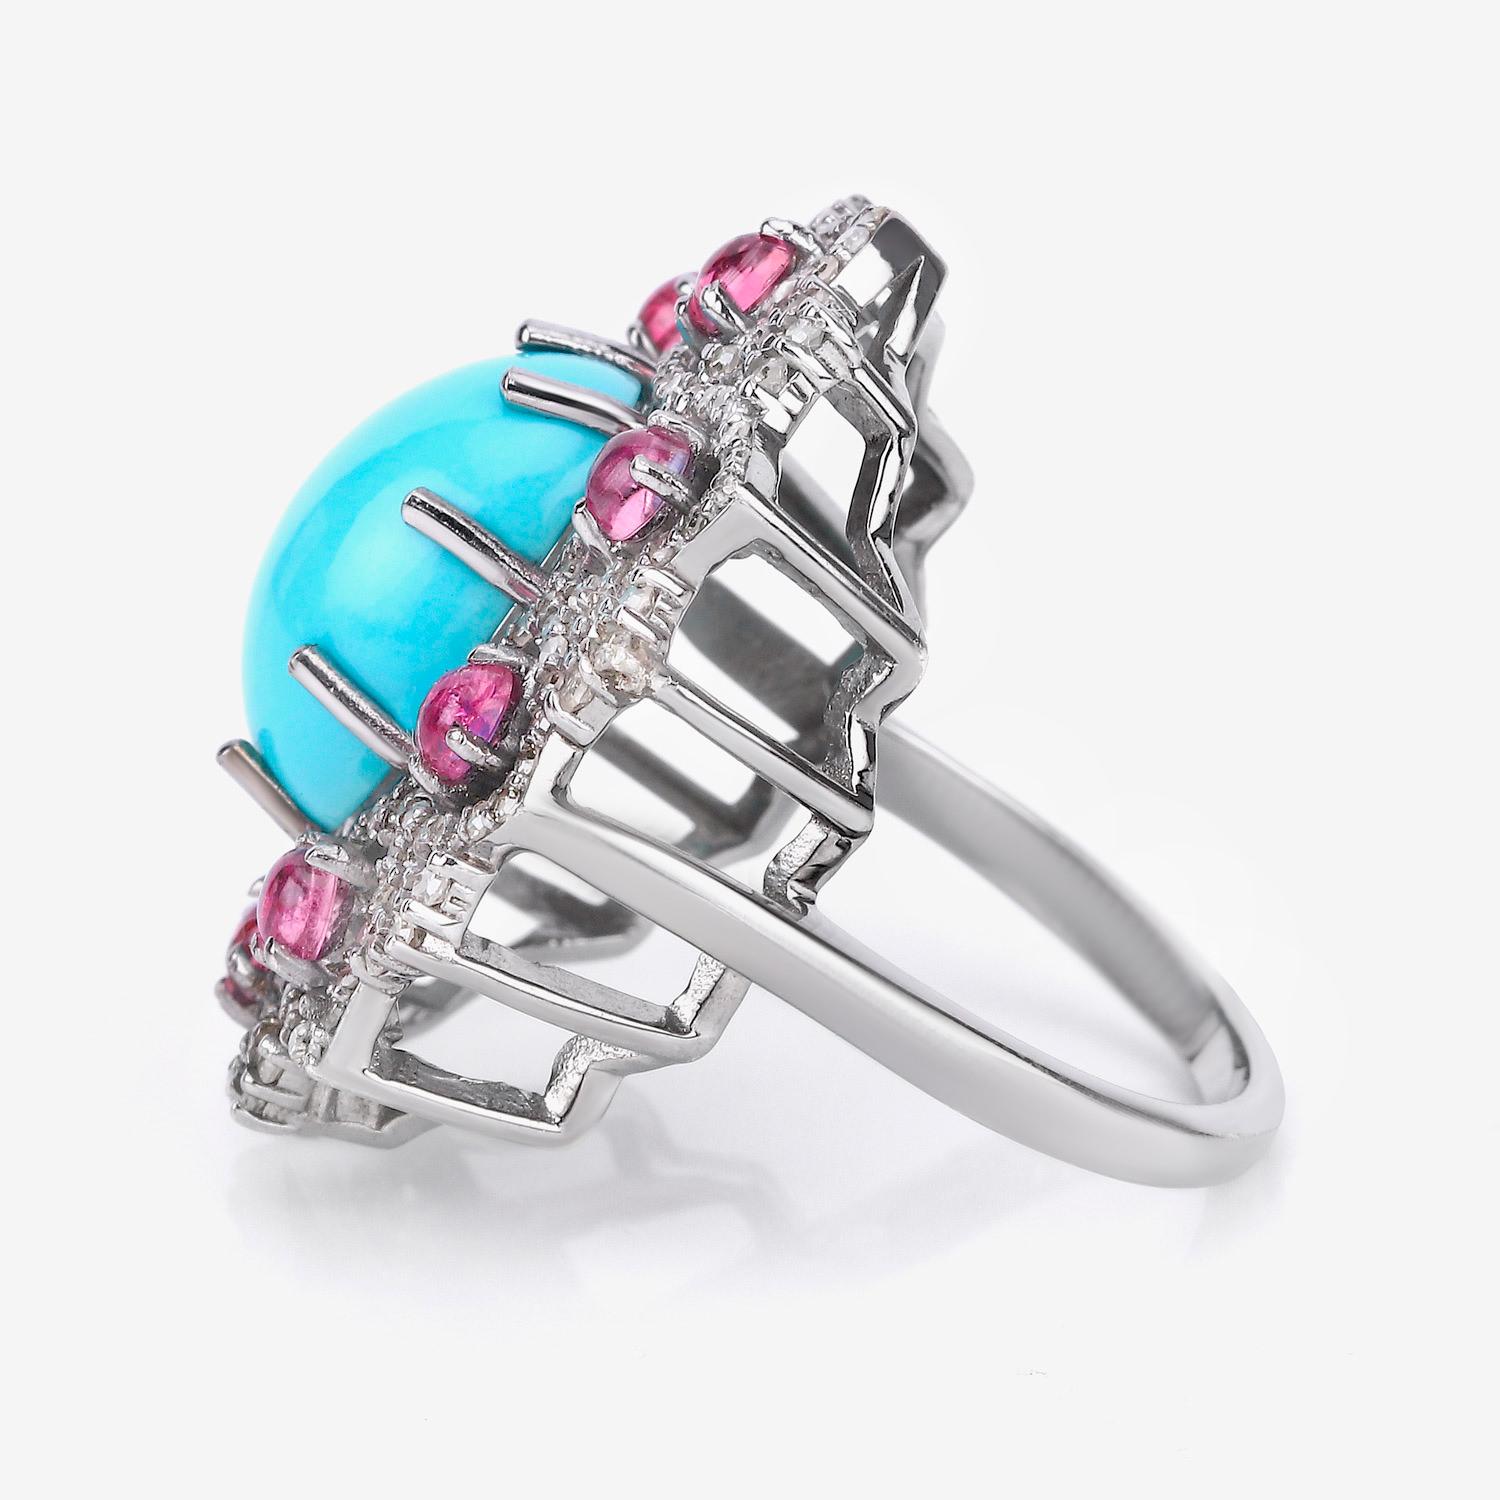 Turquoise Floral Cocktail Ring Pink Tourmalines Diamonds 7.5 Carats In Excellent Condition For Sale In Laguna Niguel, CA